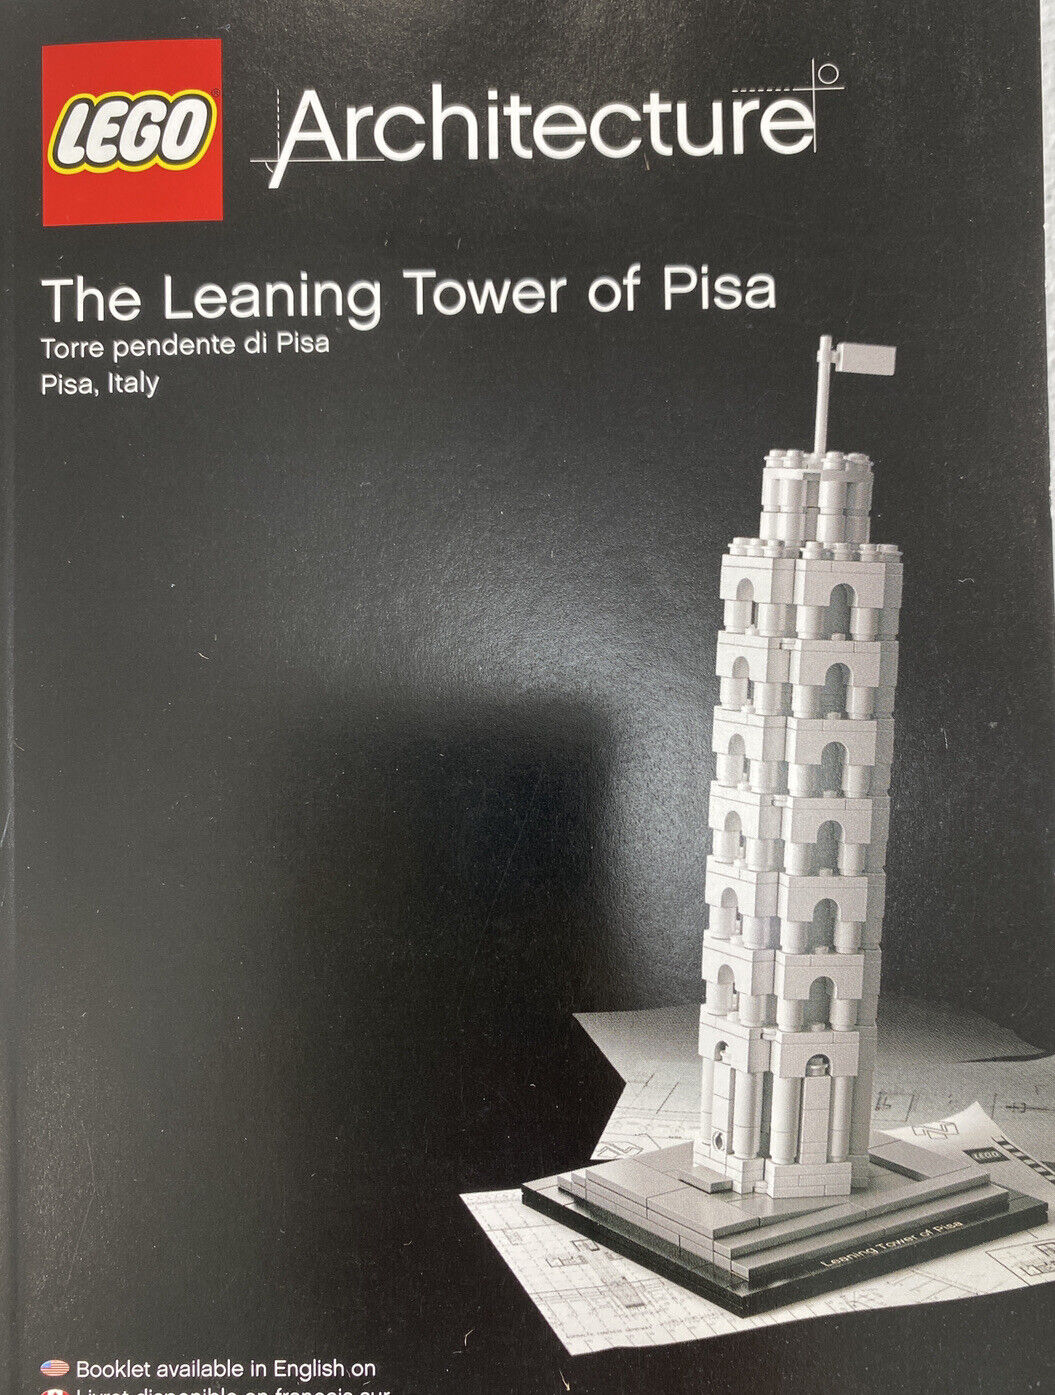 LEGO Architecture The Leaning Tower of Pisa (21015) | eBay